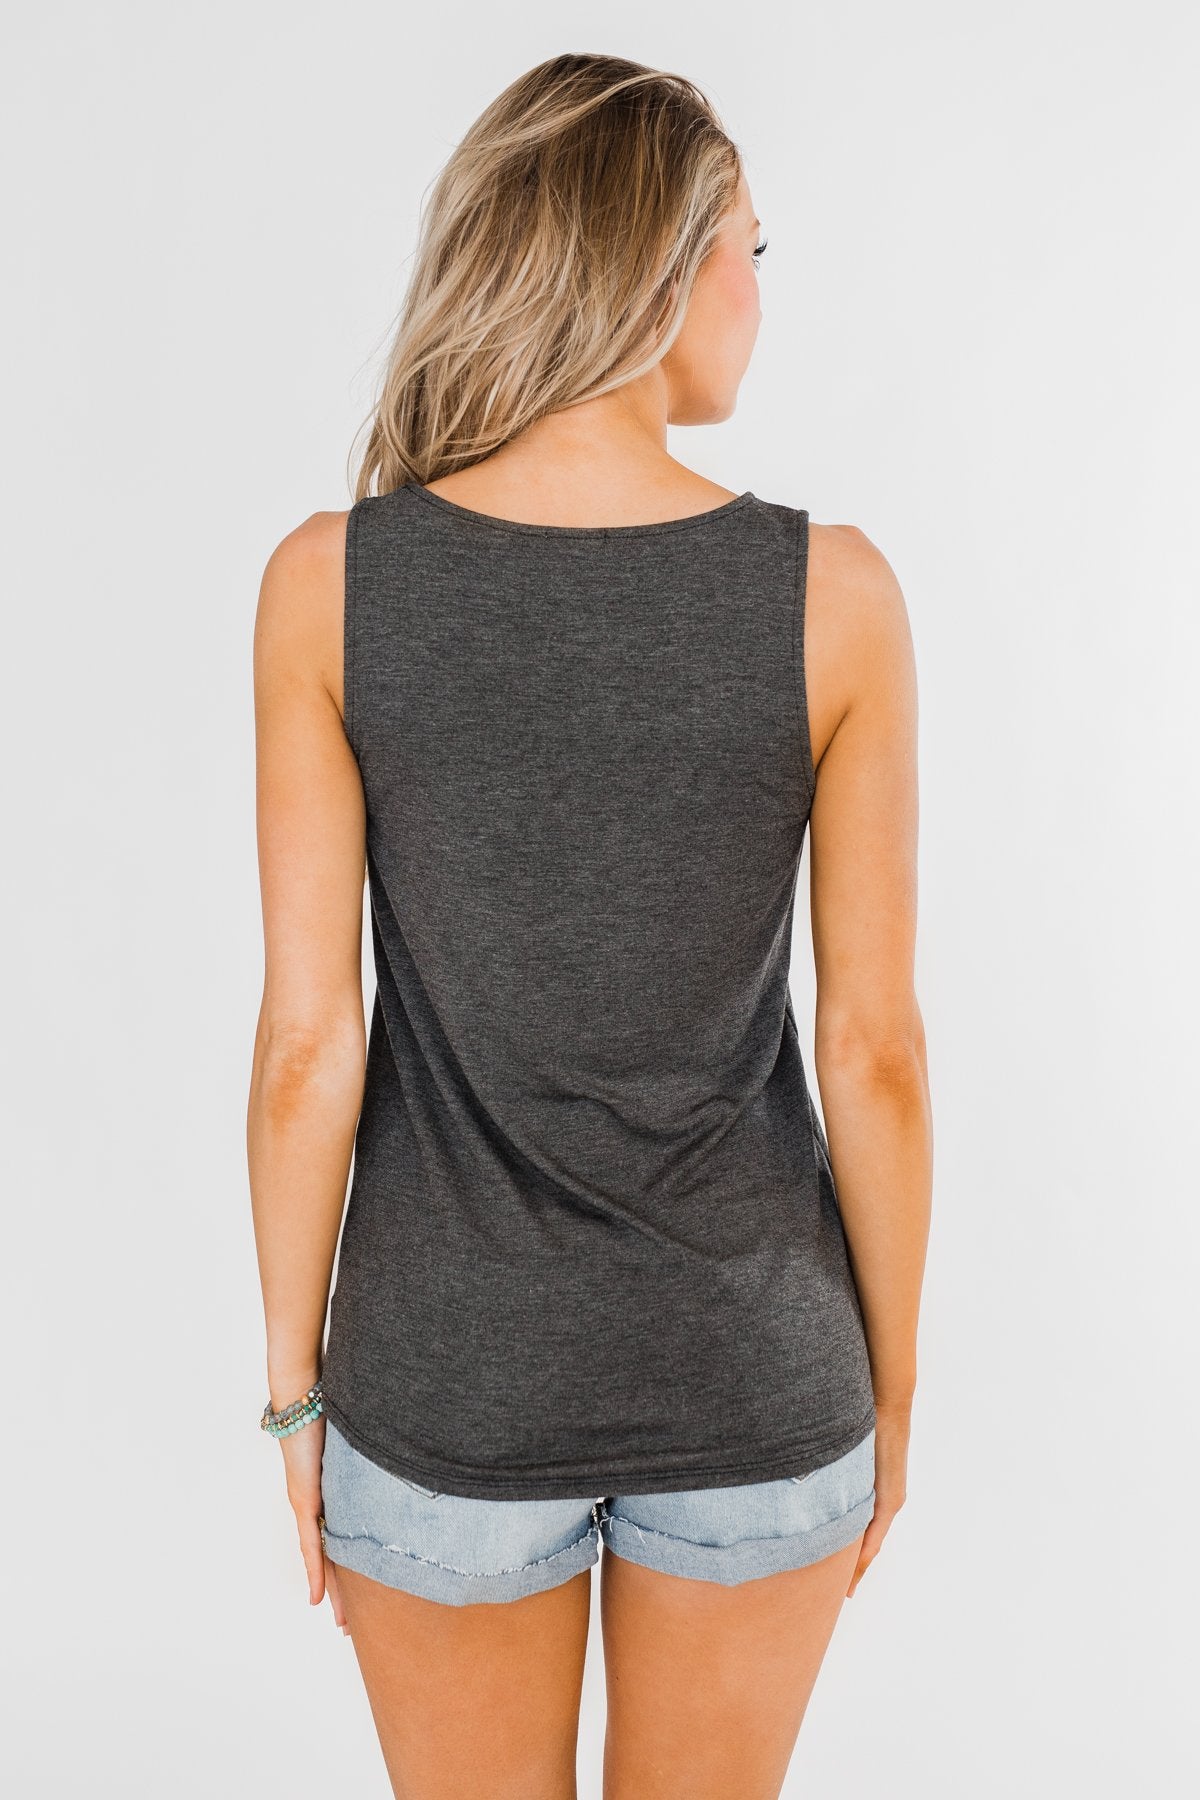 Places to Go Criss Cross Tank Top- Charcoal – The Pulse Boutique